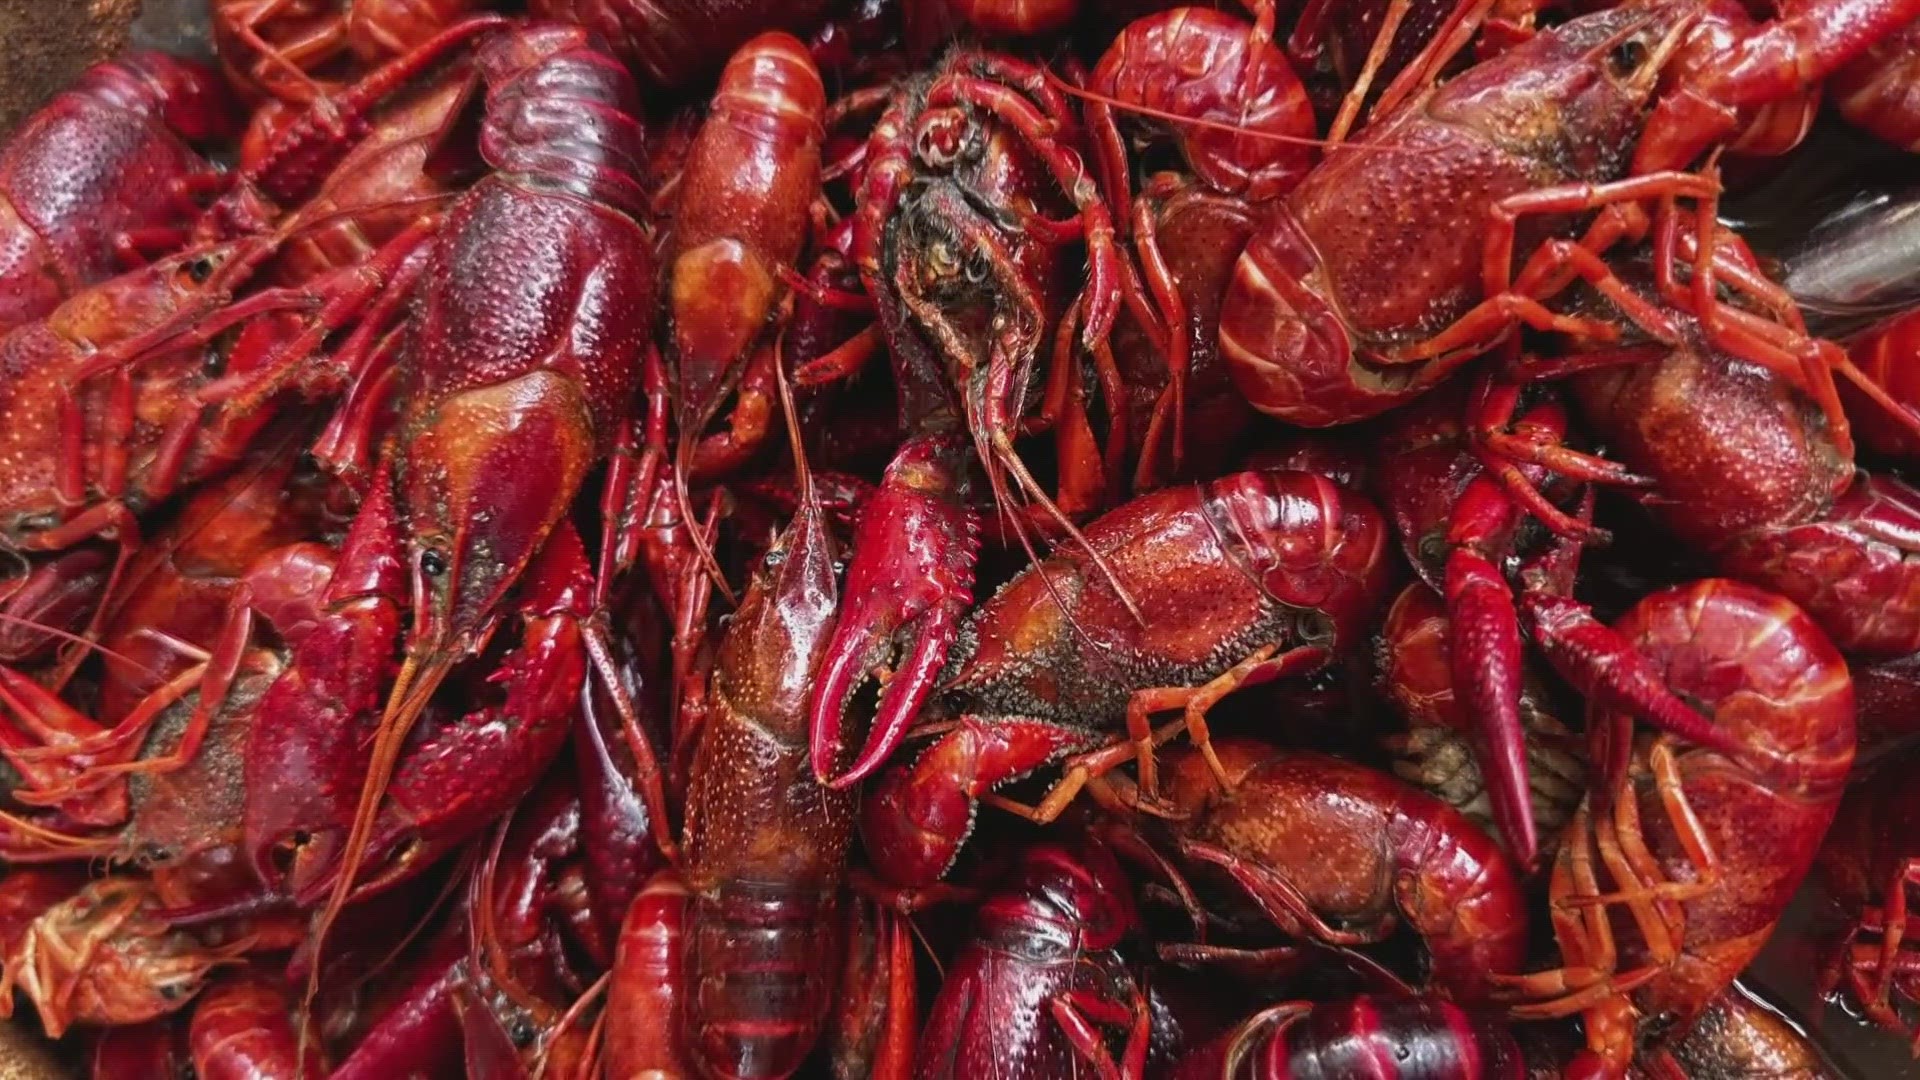 A summer drought meant crawfish are having trouble surviving and growing, meaning many farmers are pulling in low numbers in their traps.